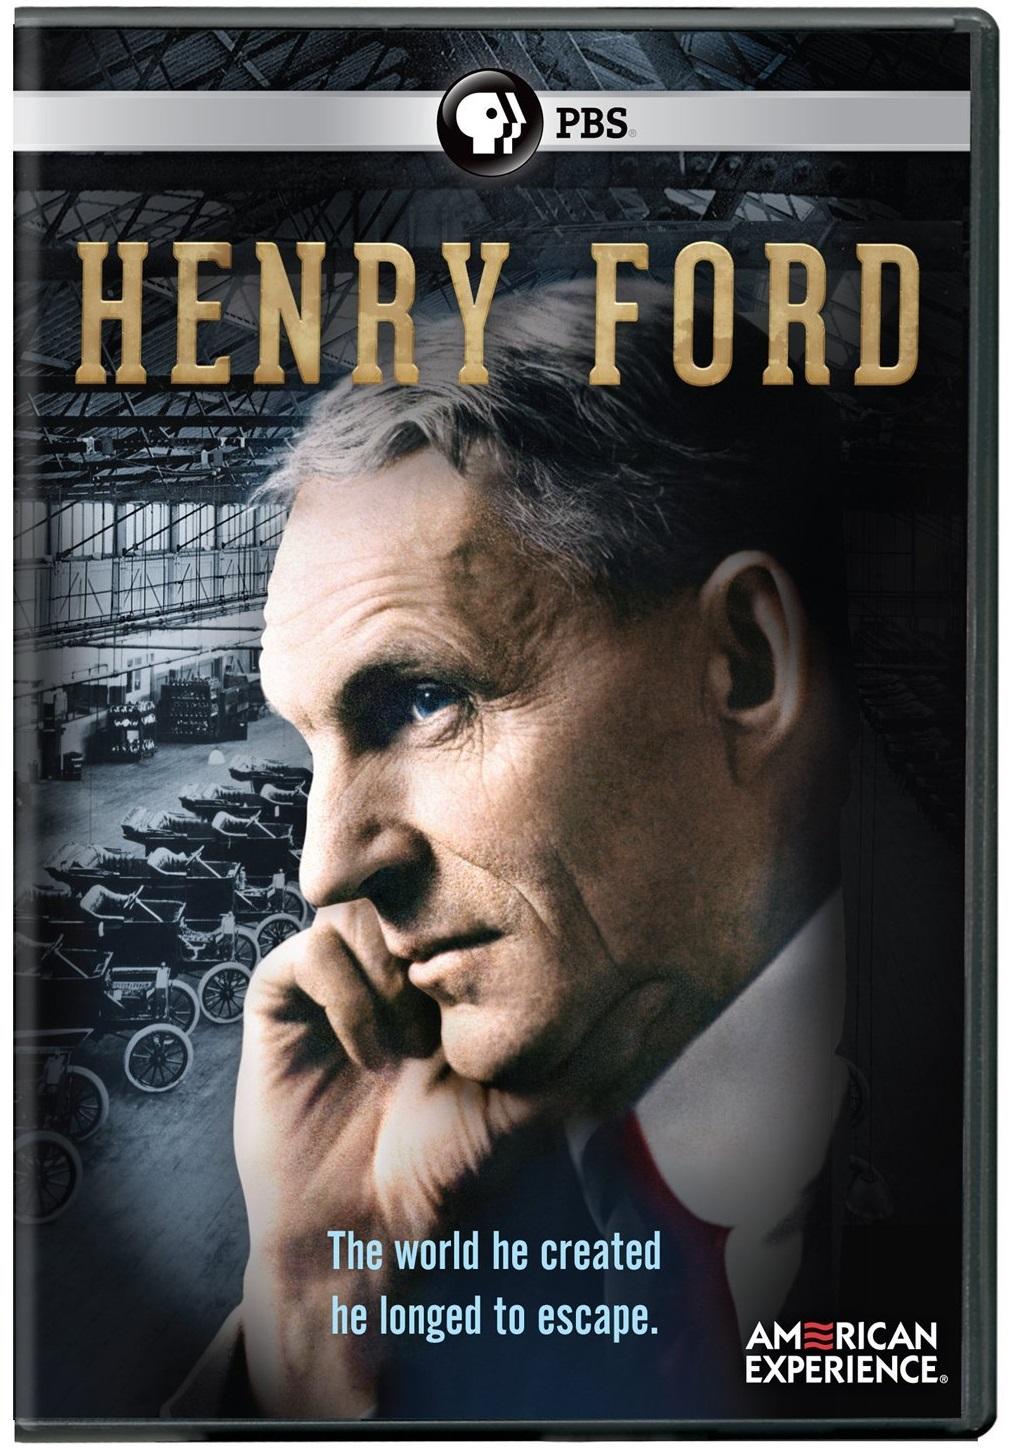 4. American Experience: Henry Ford